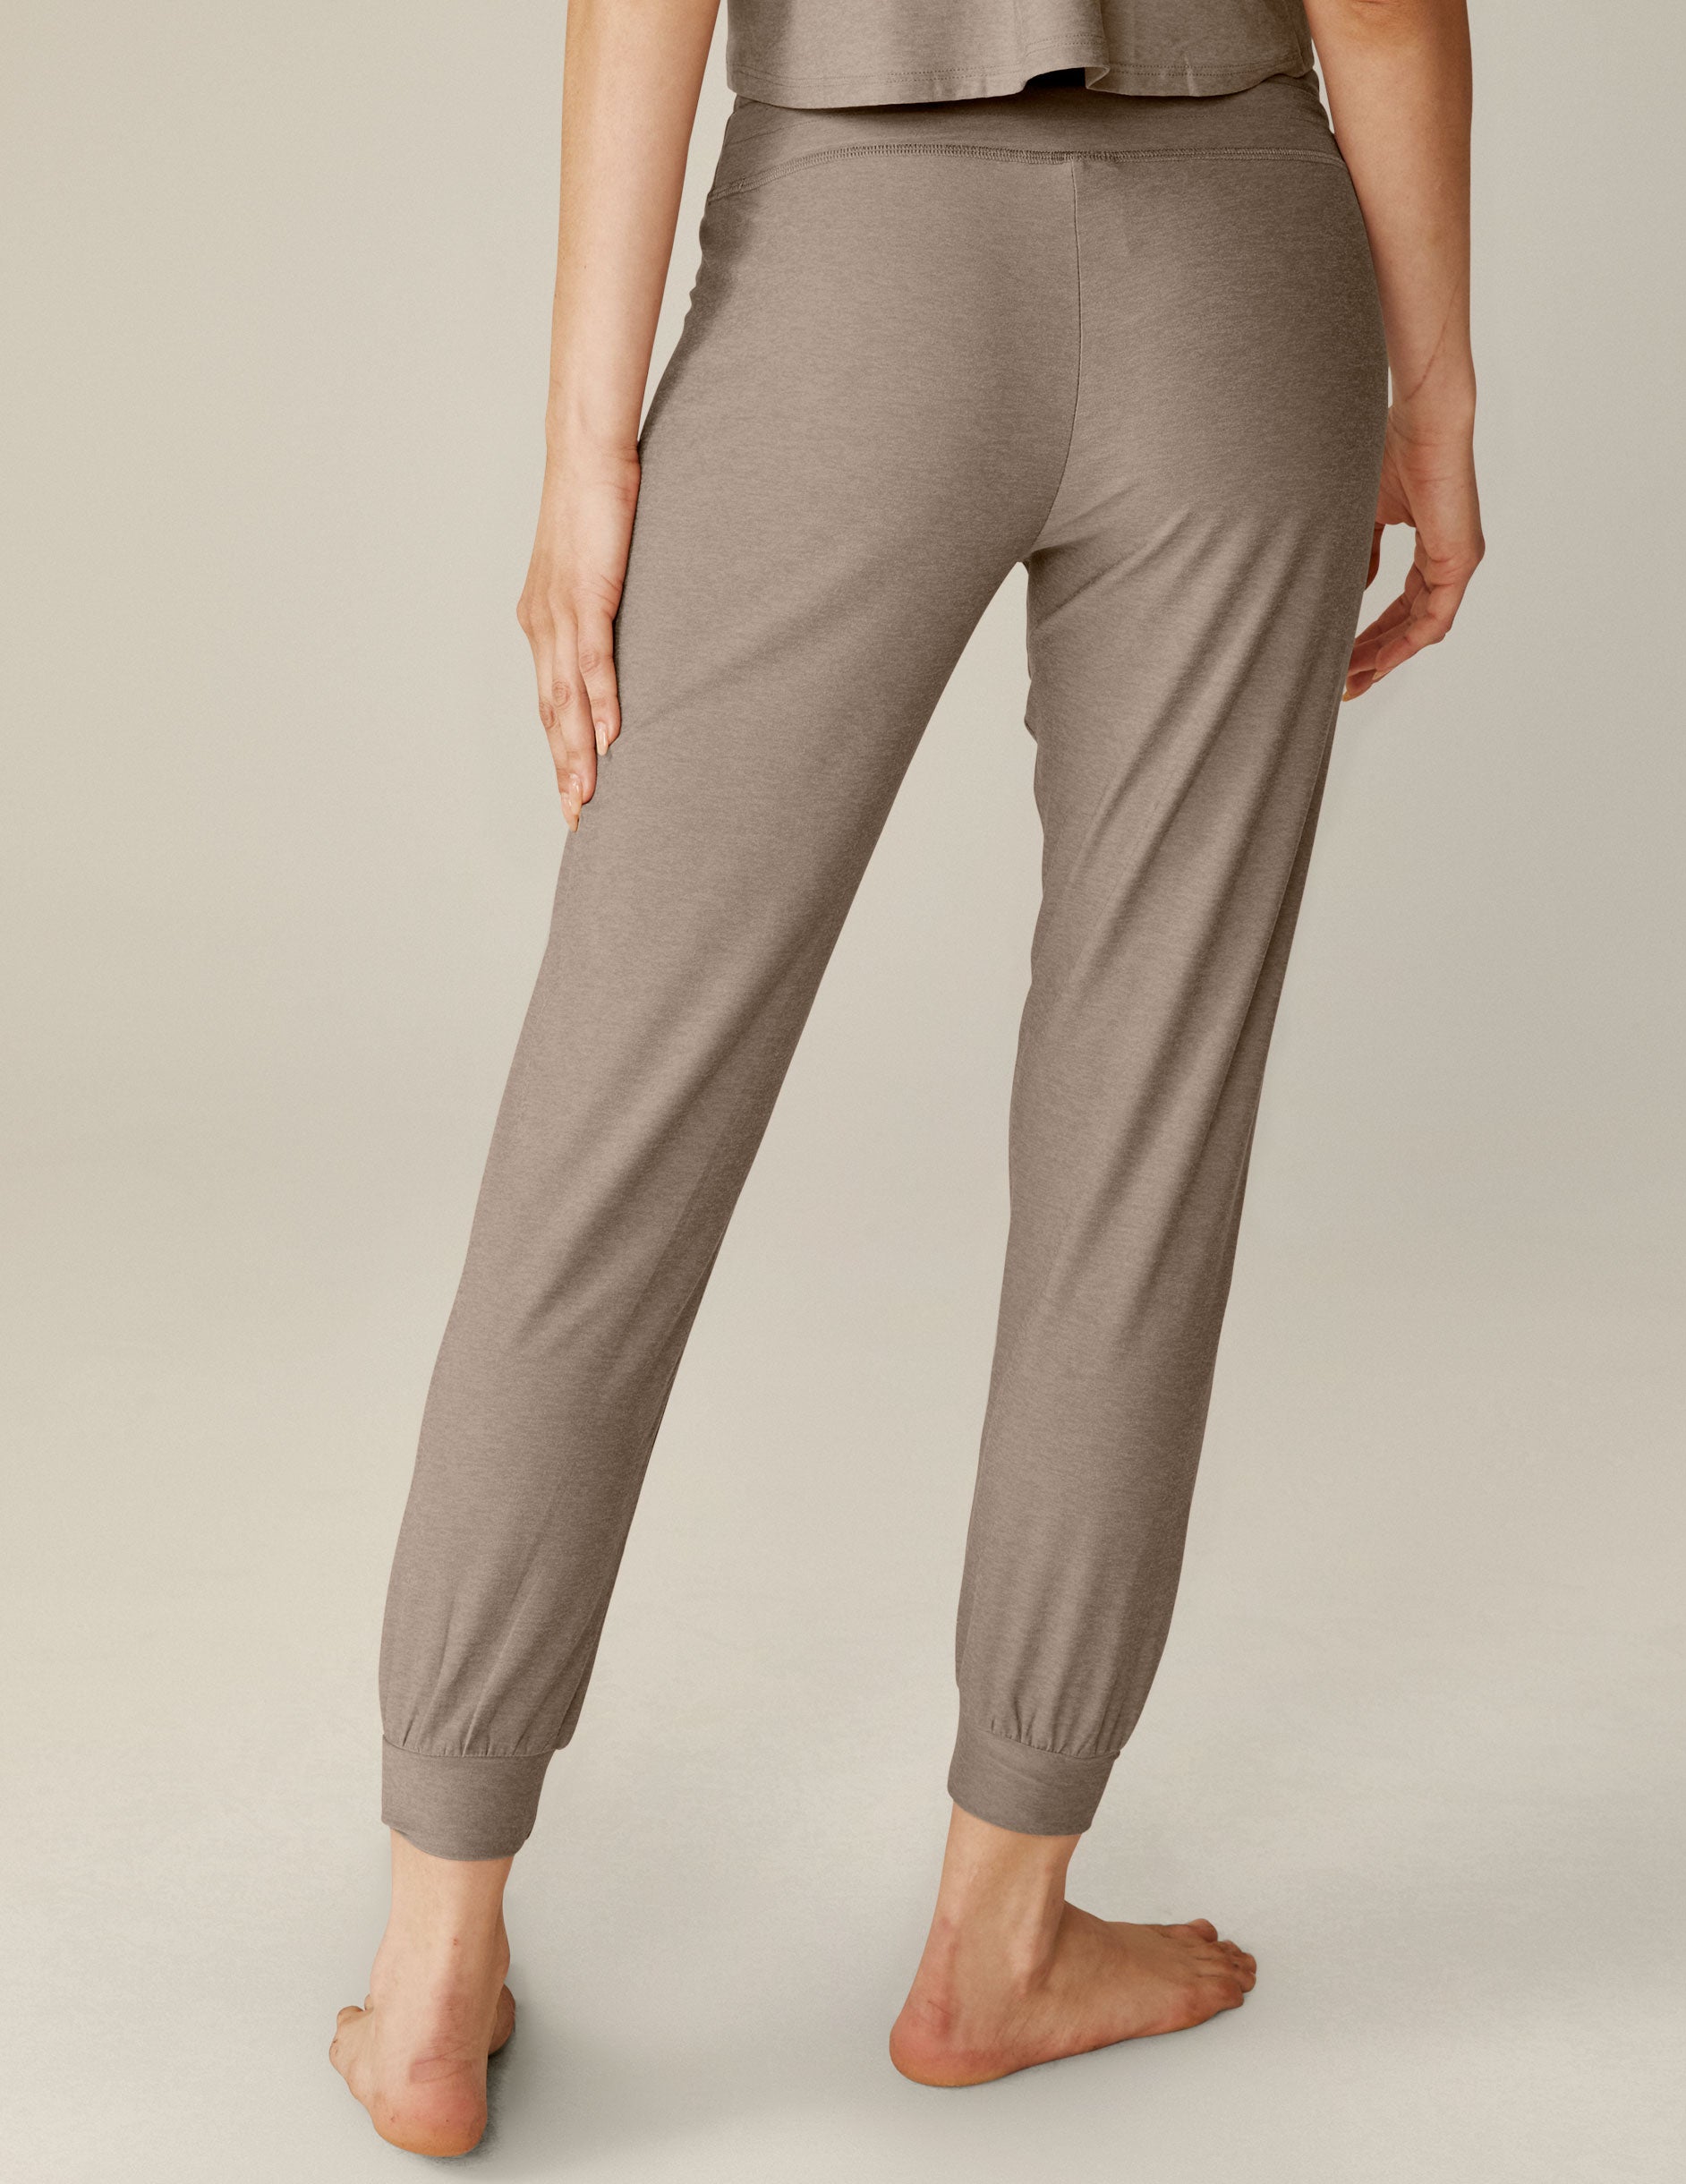 Beyond Yoga Spacedye Commuter Midi Joggers  Anthropologie Singapore -  Women's Clothing, Accessories & Home